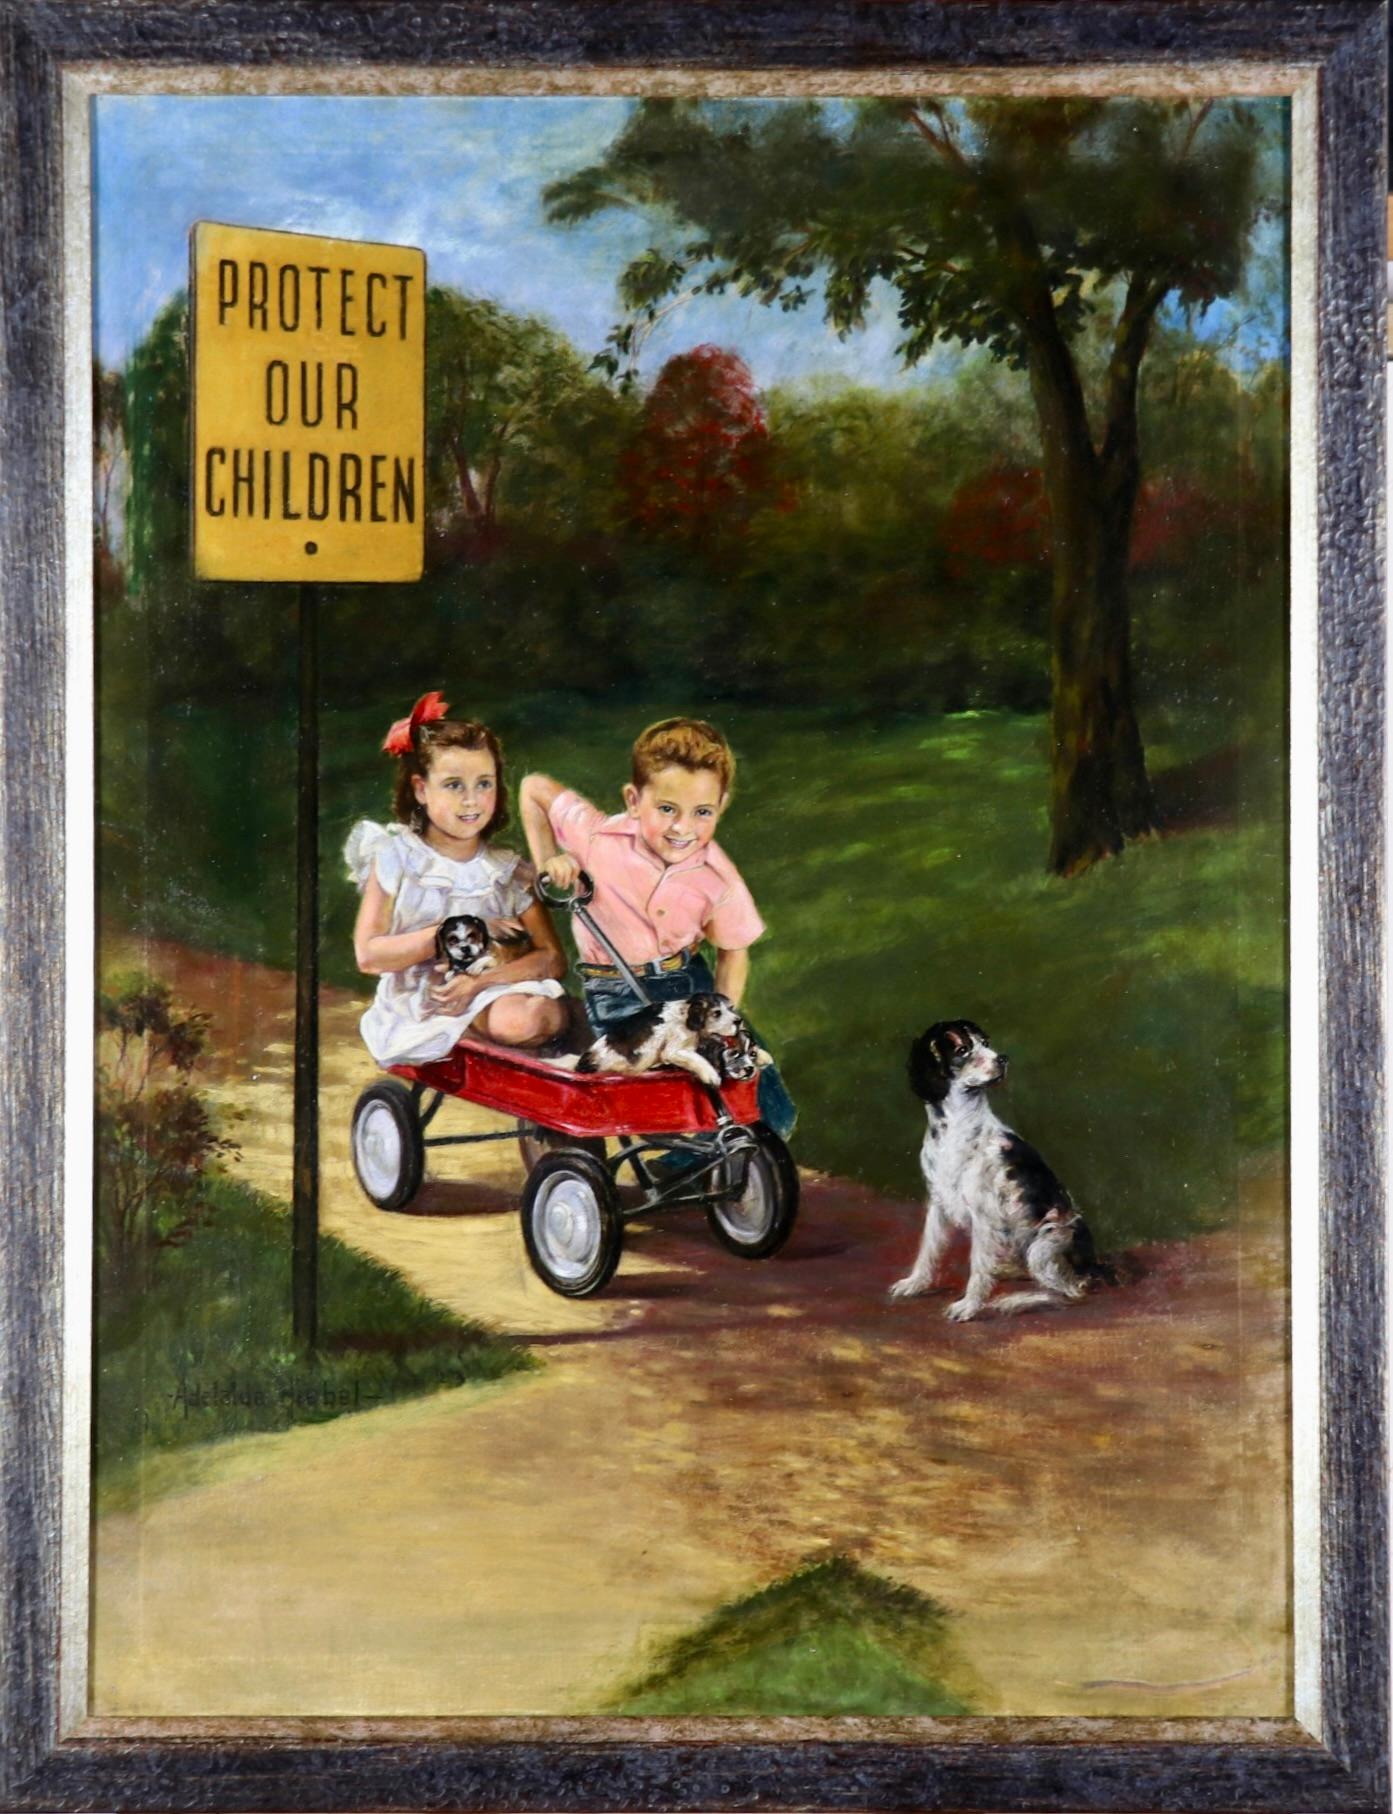 Protect Our Children - Painting by Adelaide Hiebel